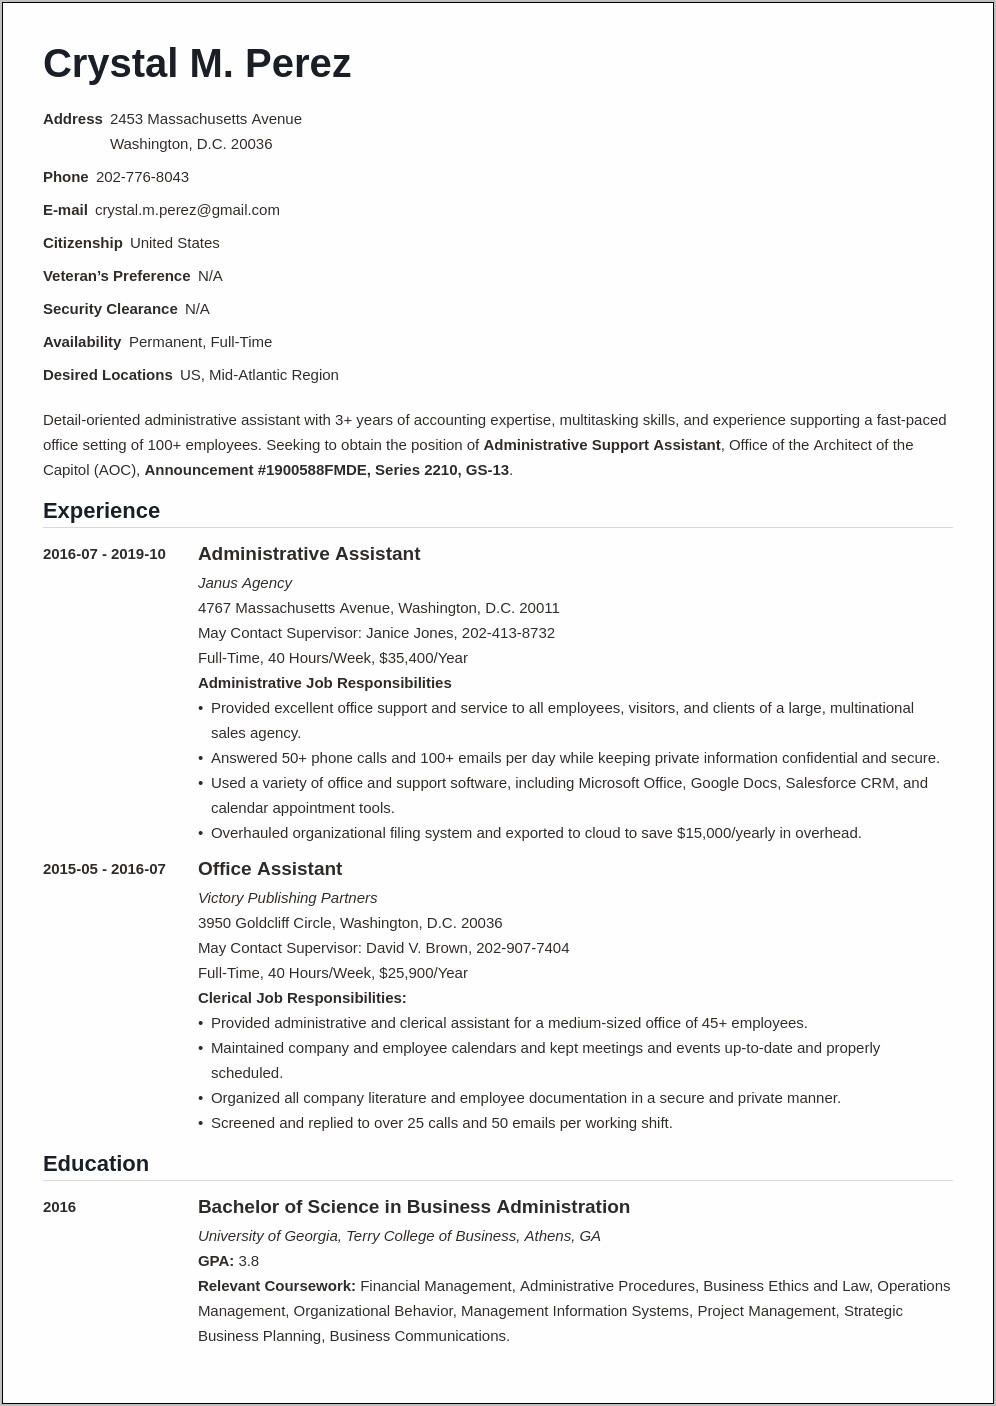 Resume Writer For Federal Jobs Tampa